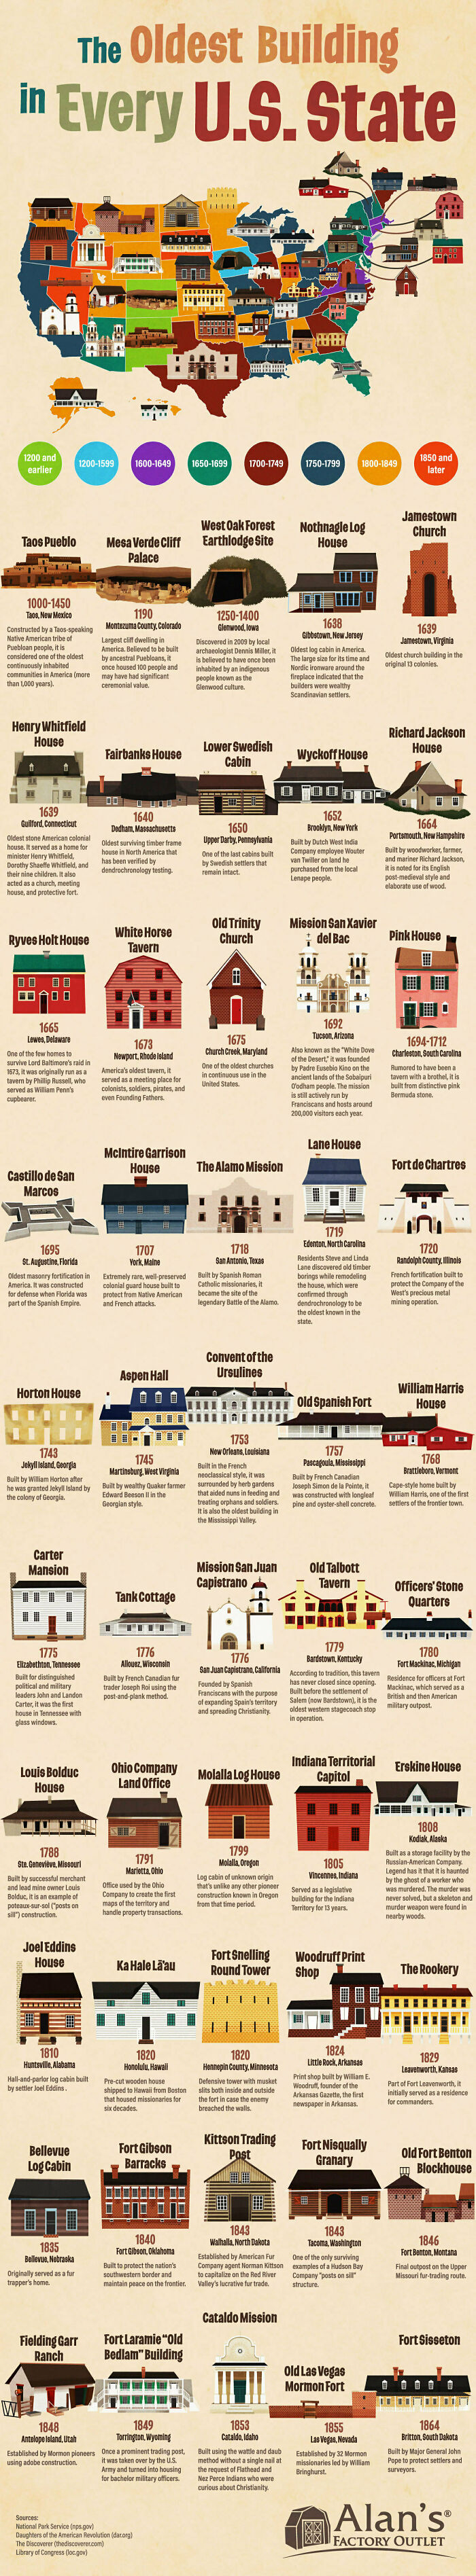 The Oldest Building In Every U.S. State